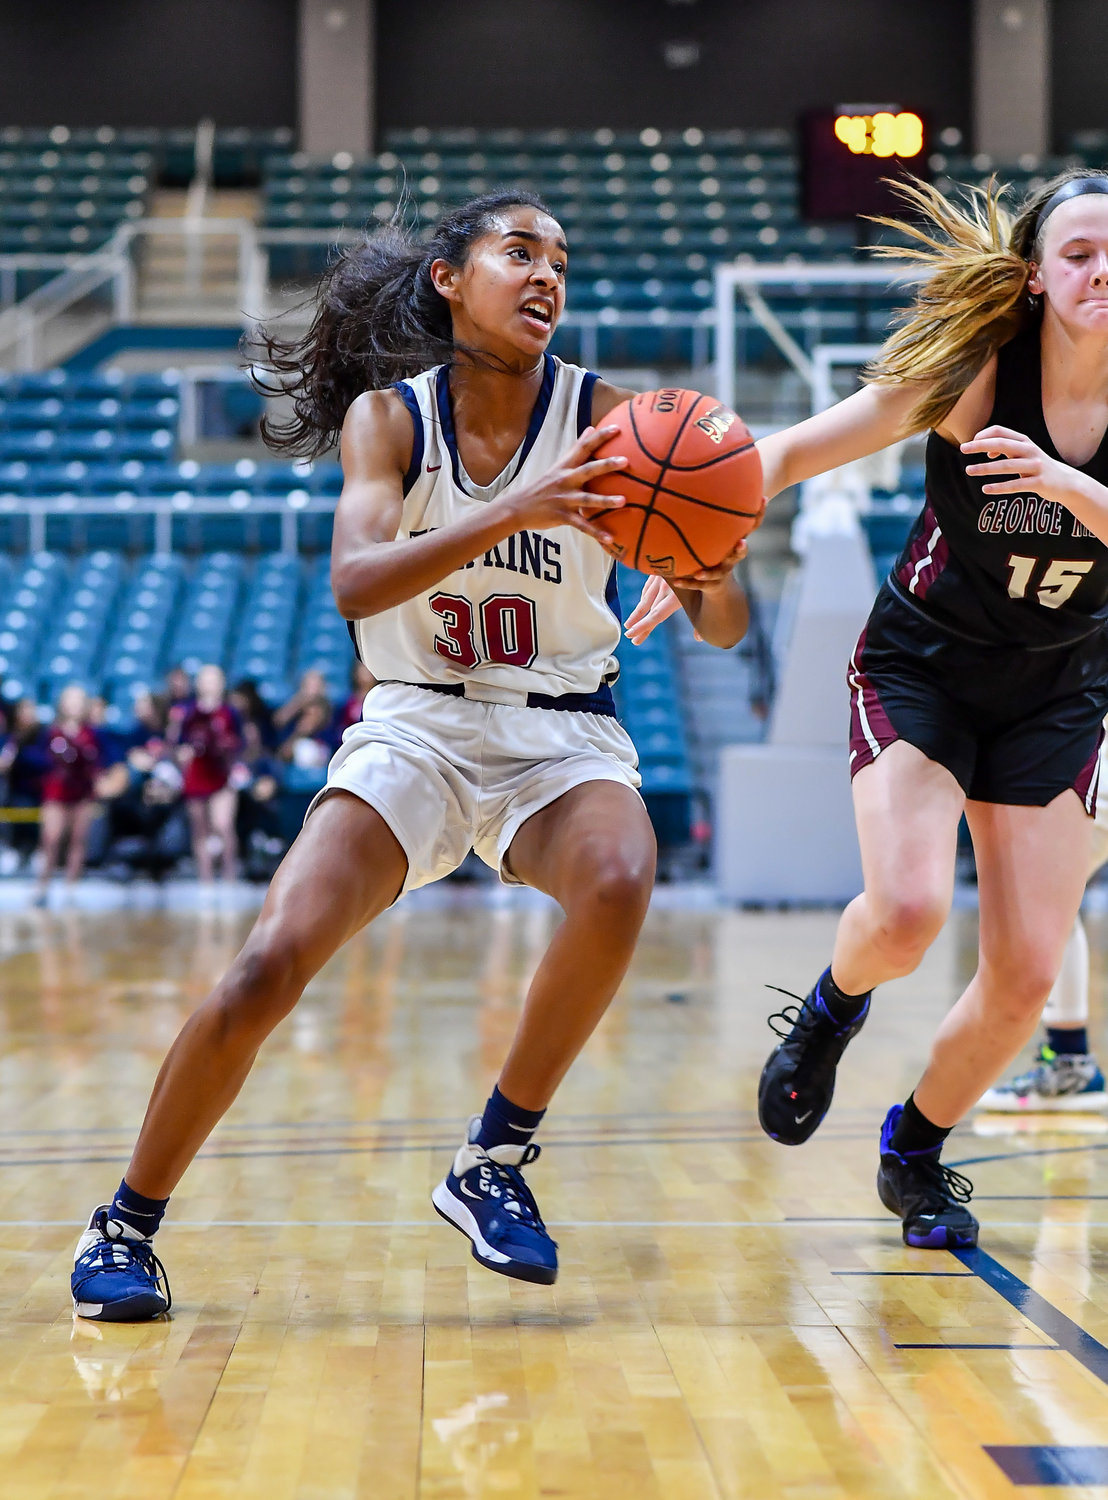 Katy Tx. Feb 15, 2022: Tompkins Tanya Philip #30 drives to the basket during the Bi-District playoff, Tompkins vs George Ranch. (Photo by Mark Goodman / Katy Times)